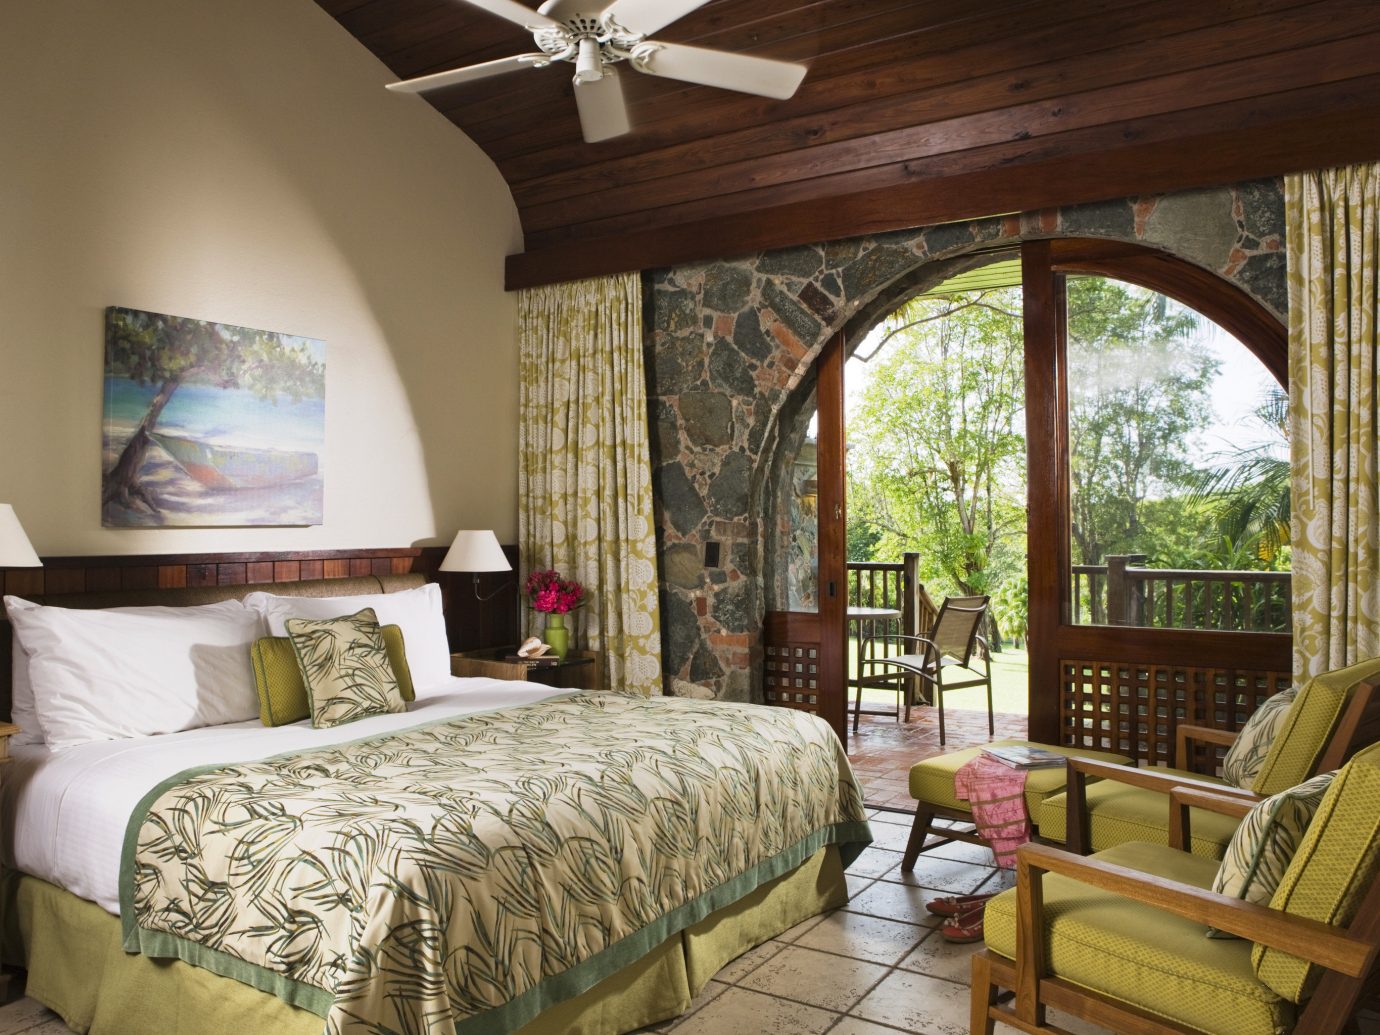 Bedroom Eco Family Hotels Luxury Resort Romance Romantic Scenic views Suite Trip Ideas Tropical indoor bed sofa room window property estate cottage home living room Villa interior design real estate farmhouse mansion furniture